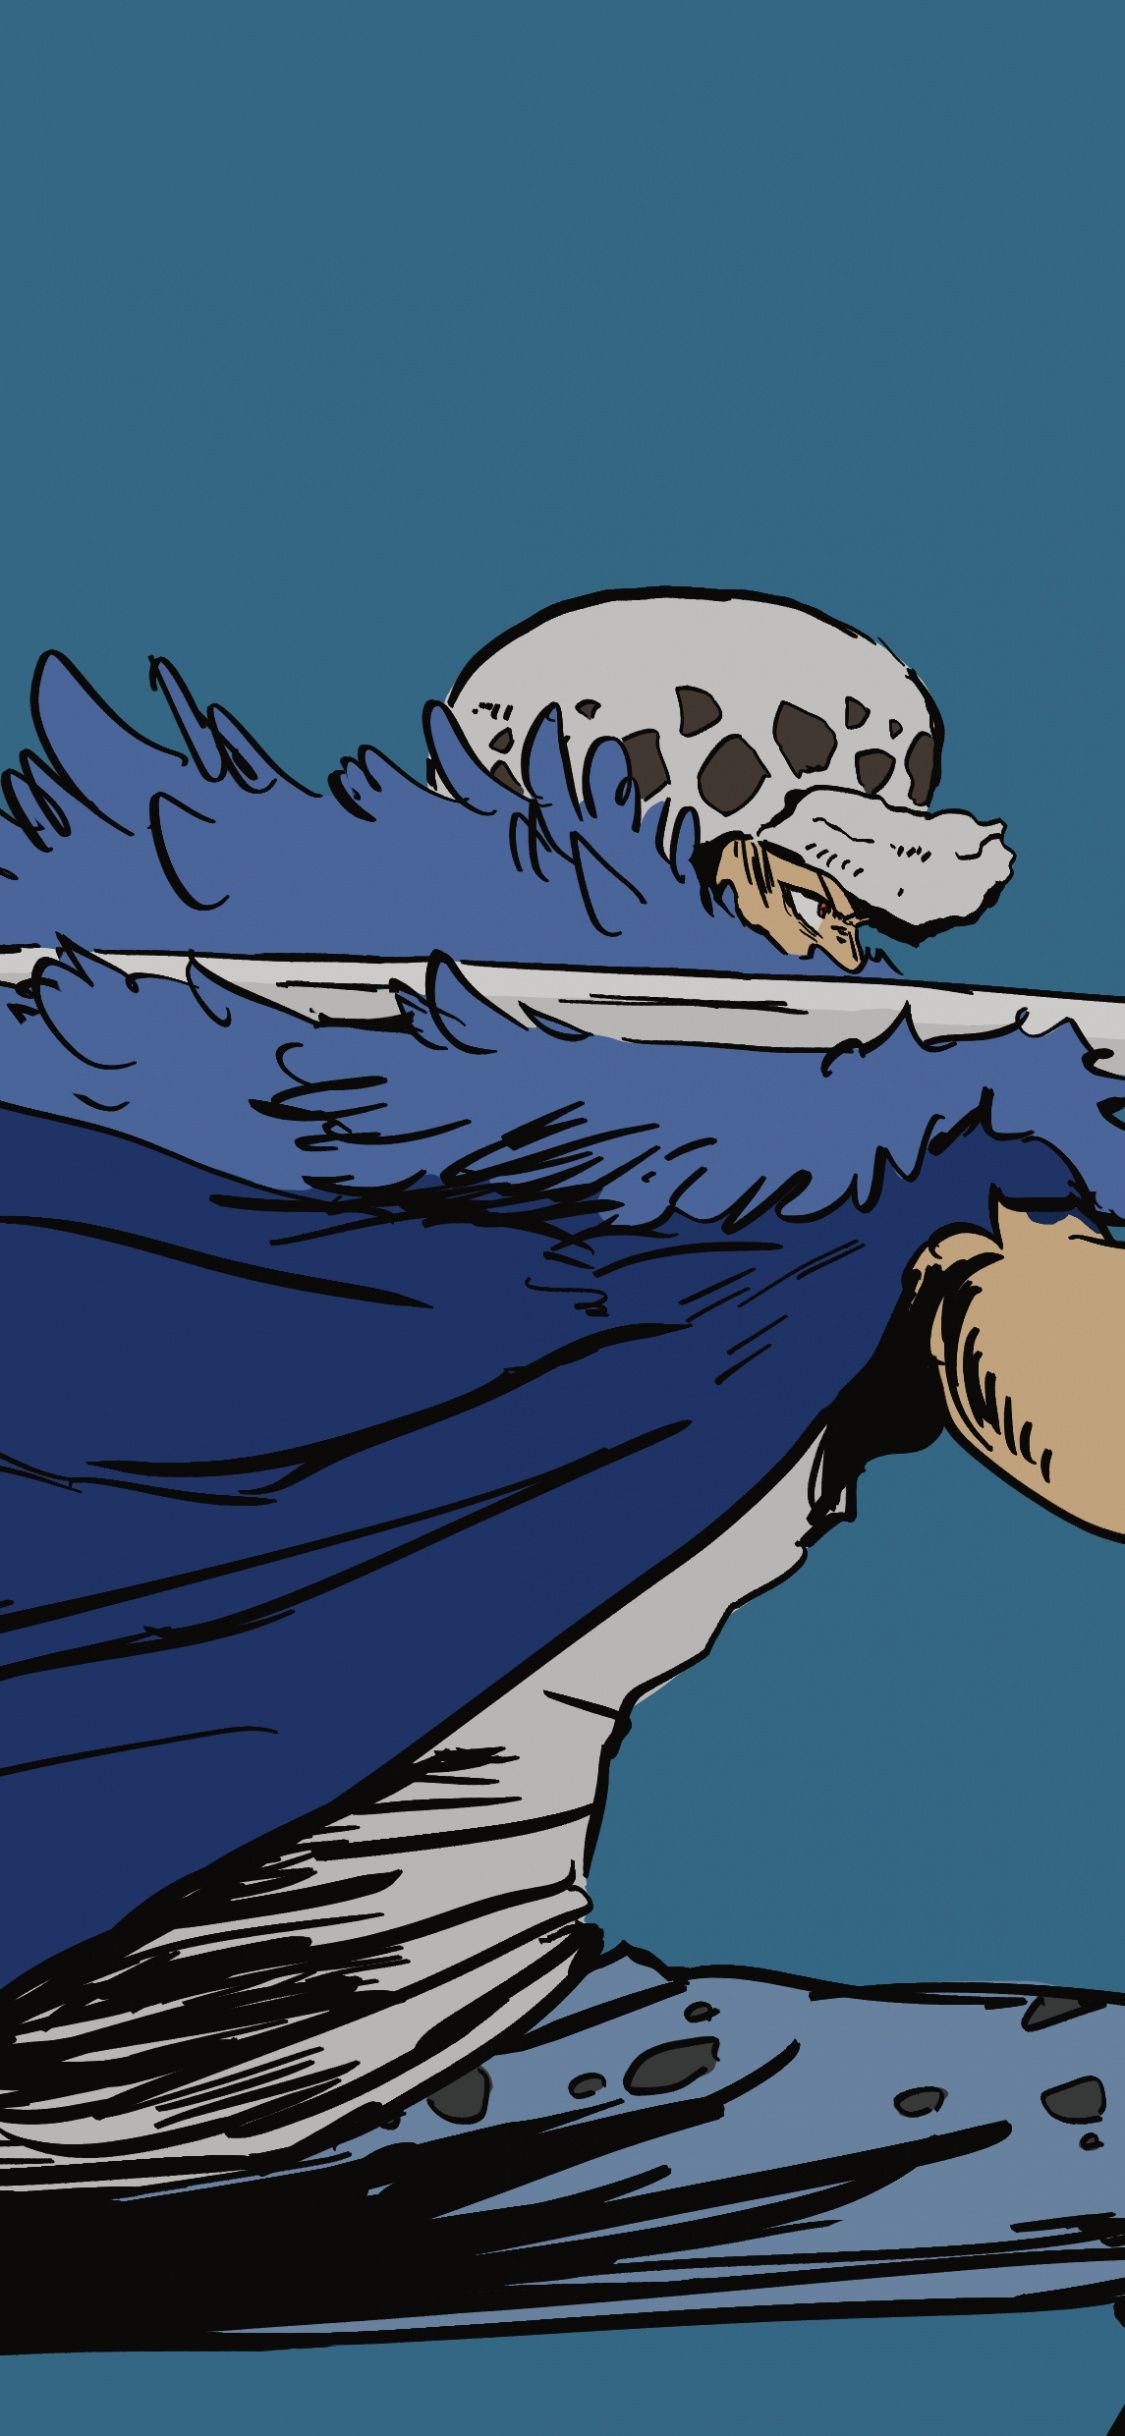 A skull-headed creature in a blue robe raises a sword. - One Piece